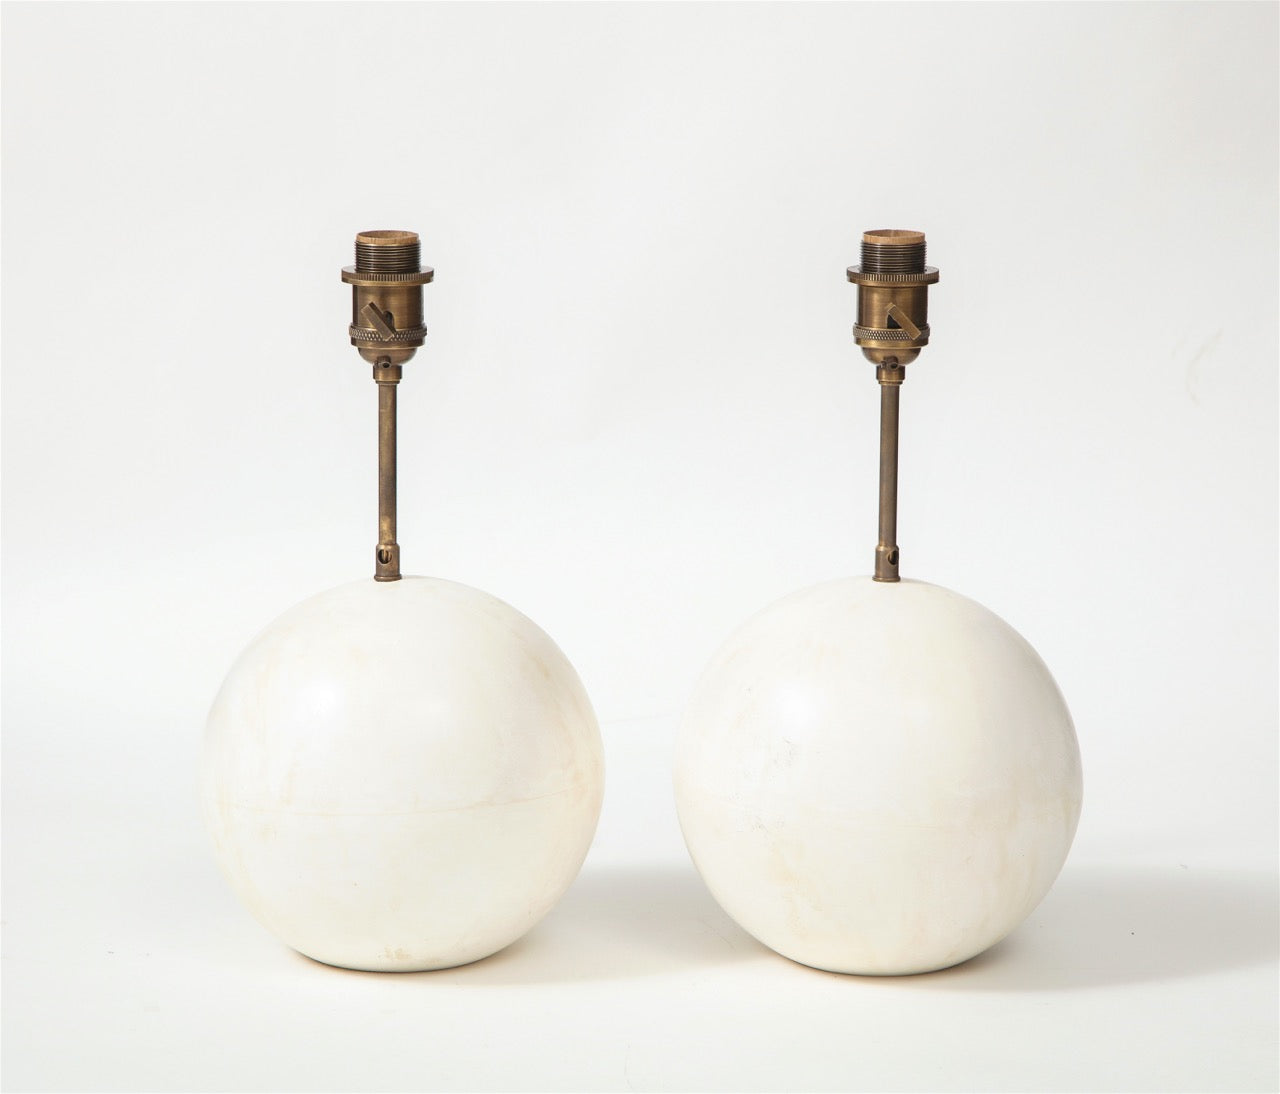 Pair of Handmade Plaster Table Lamps with Globe Bases by Facto Atelier Paris